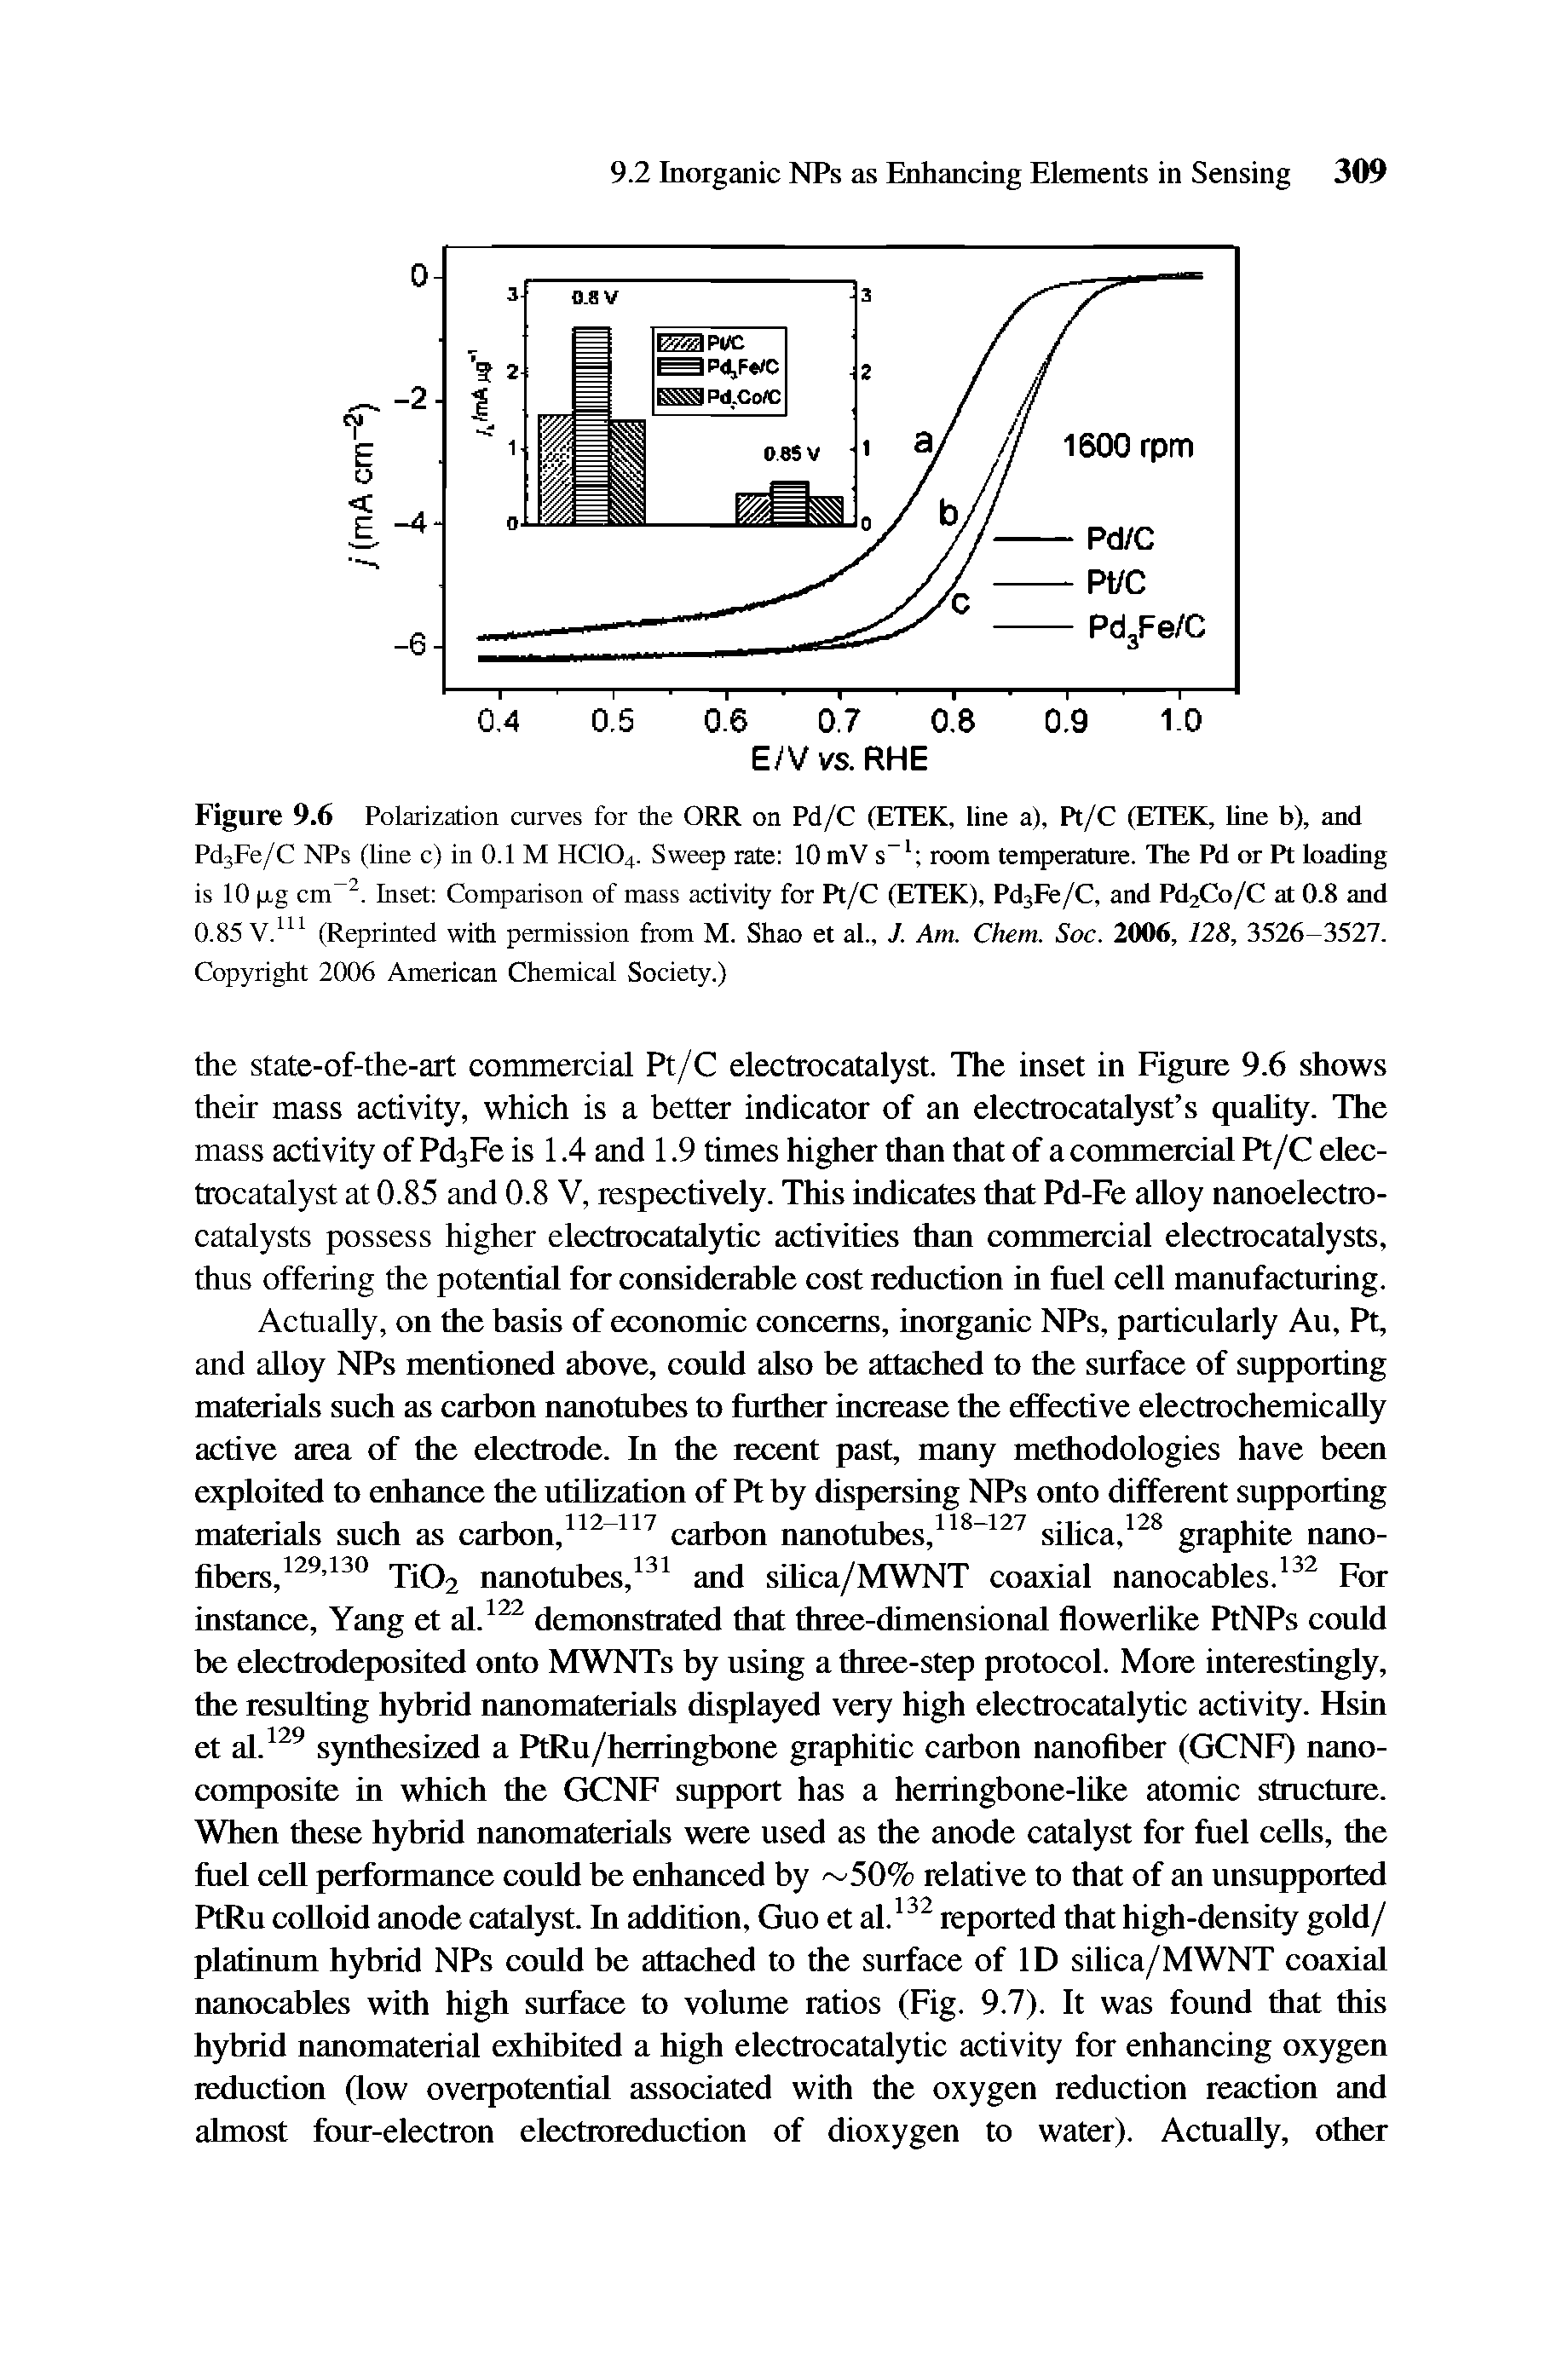 Figure 9.6 Polarization curves for the ORR on Pd/C (ETEK, line a), Pt/C (ETEK, line b), and Pd3Fe/C NPs (line c) in 0.1 M HC104. Sweep rate 10 mV s-1 room temperature. The Pd or Pt loading is 10 (jig cm 2. Inset Comparison of mass activity for Pt/C (ETEK), Pd3Fe/C, and Pd2Co/C at 0.8 and 0.85 V.111 (Reprinted with permission from M. Shao et al., J. Am. Chem. Soc. 2006, 128, 3526-3527. Copyright 2006 American Chemical Society.)...